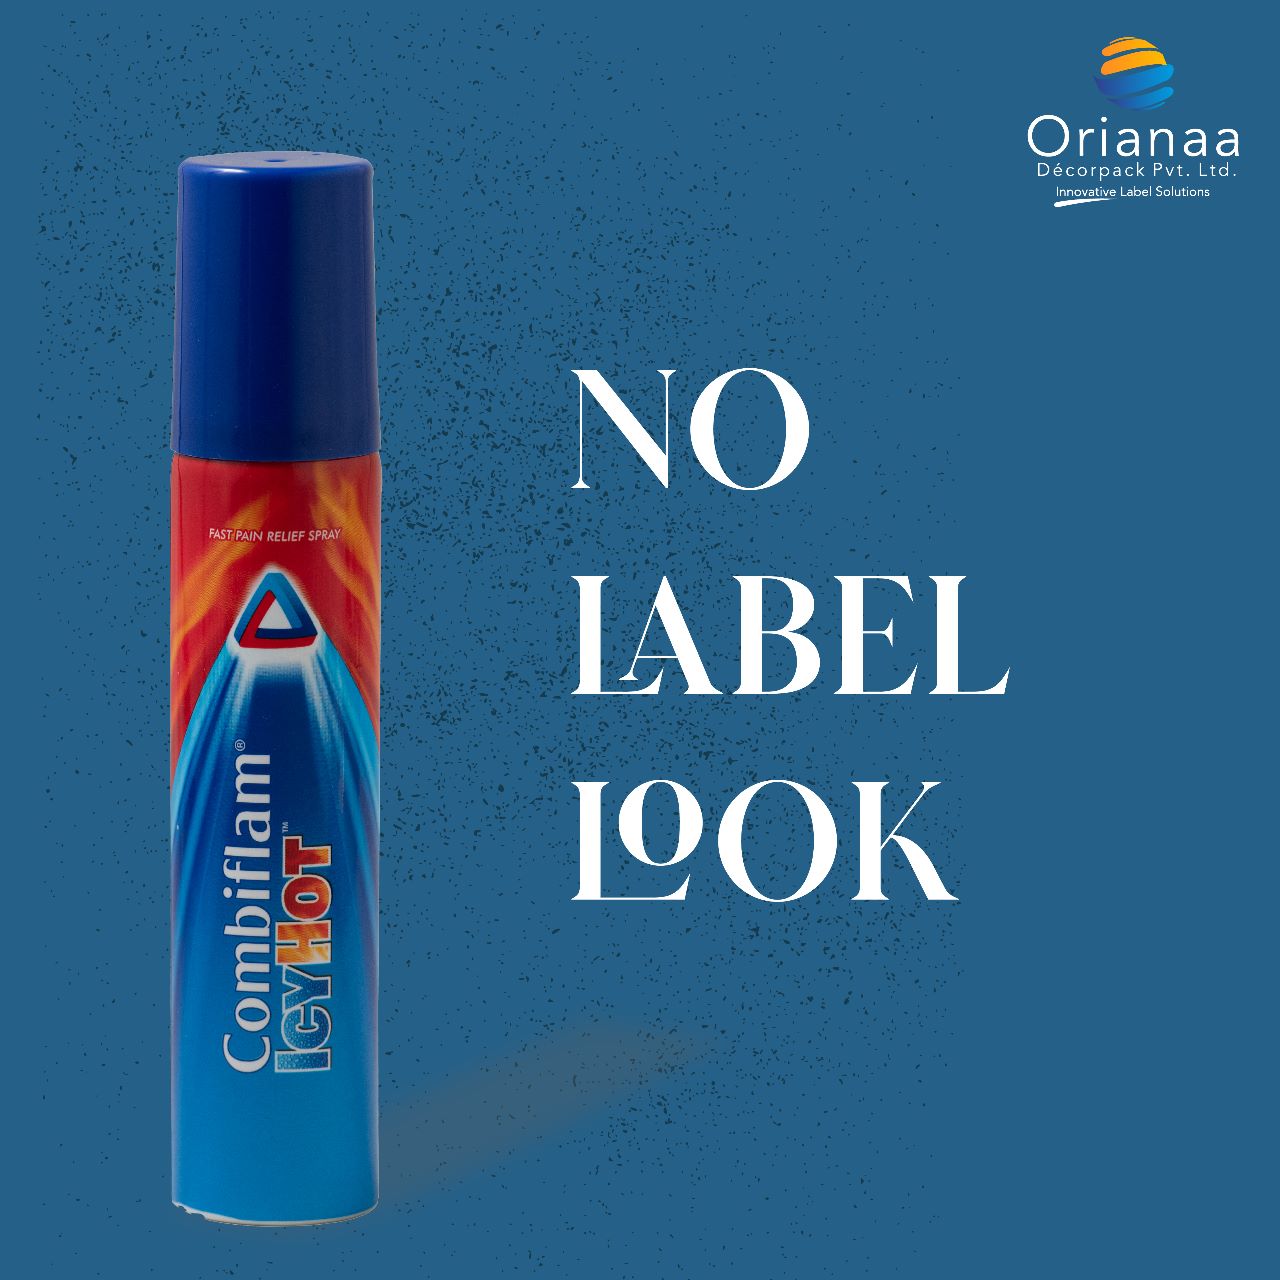 Shrink Sleeves - No Label Look - Orianaa Decorpack - Best Label Manufacture Compoany